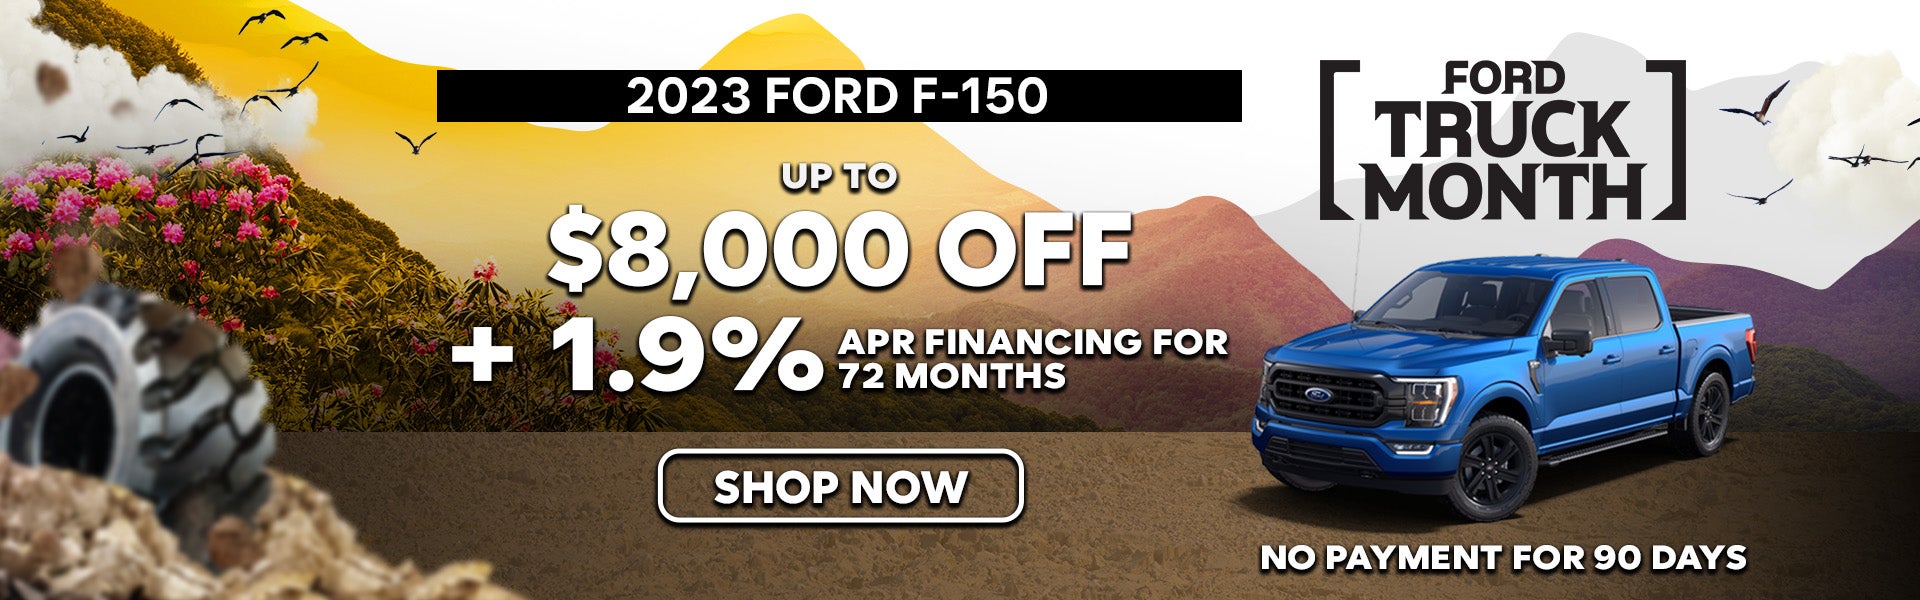 2023 Ford F-150 Special Offer